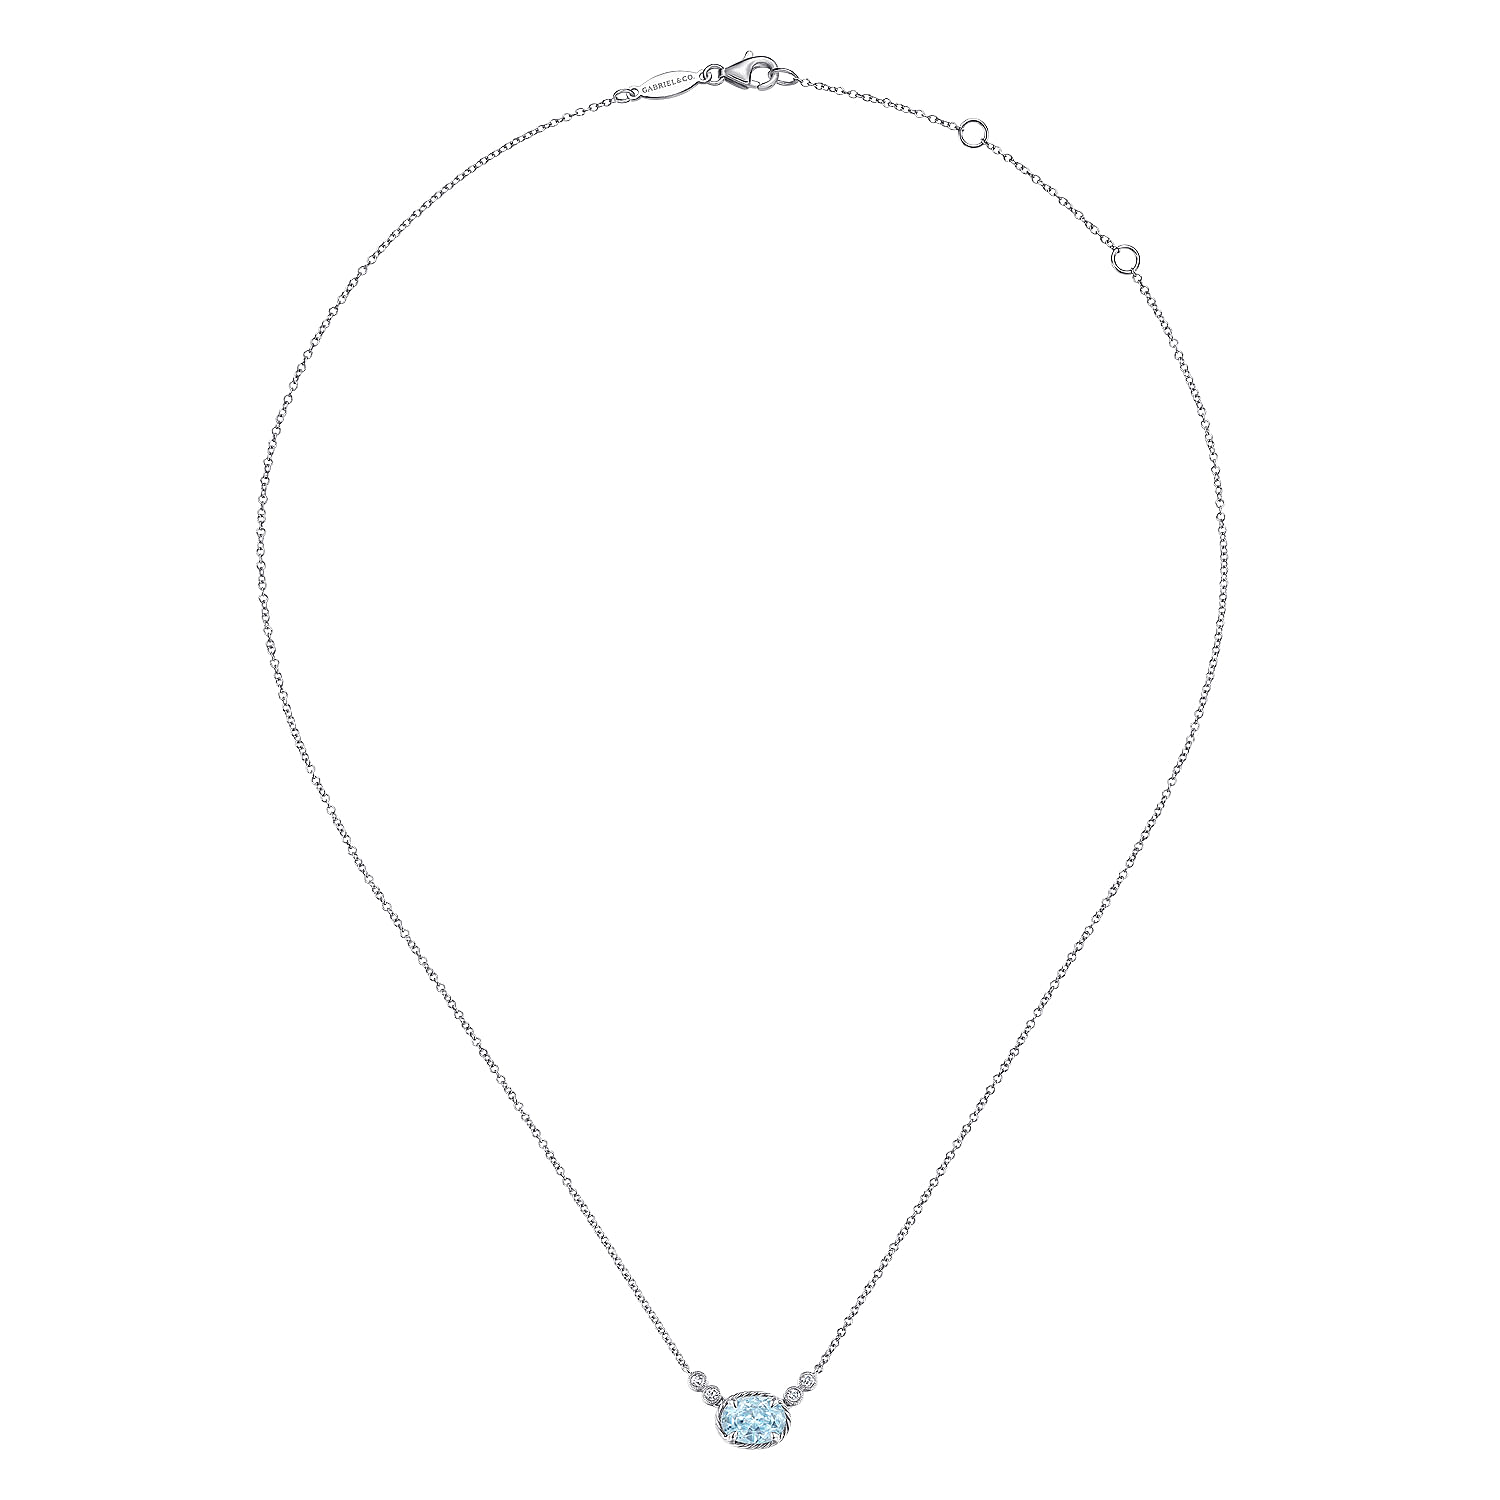 14K White Gold Oval Aquamarine Pendant Necklace with Diamond Accents - 0.06 ct - Shot 2